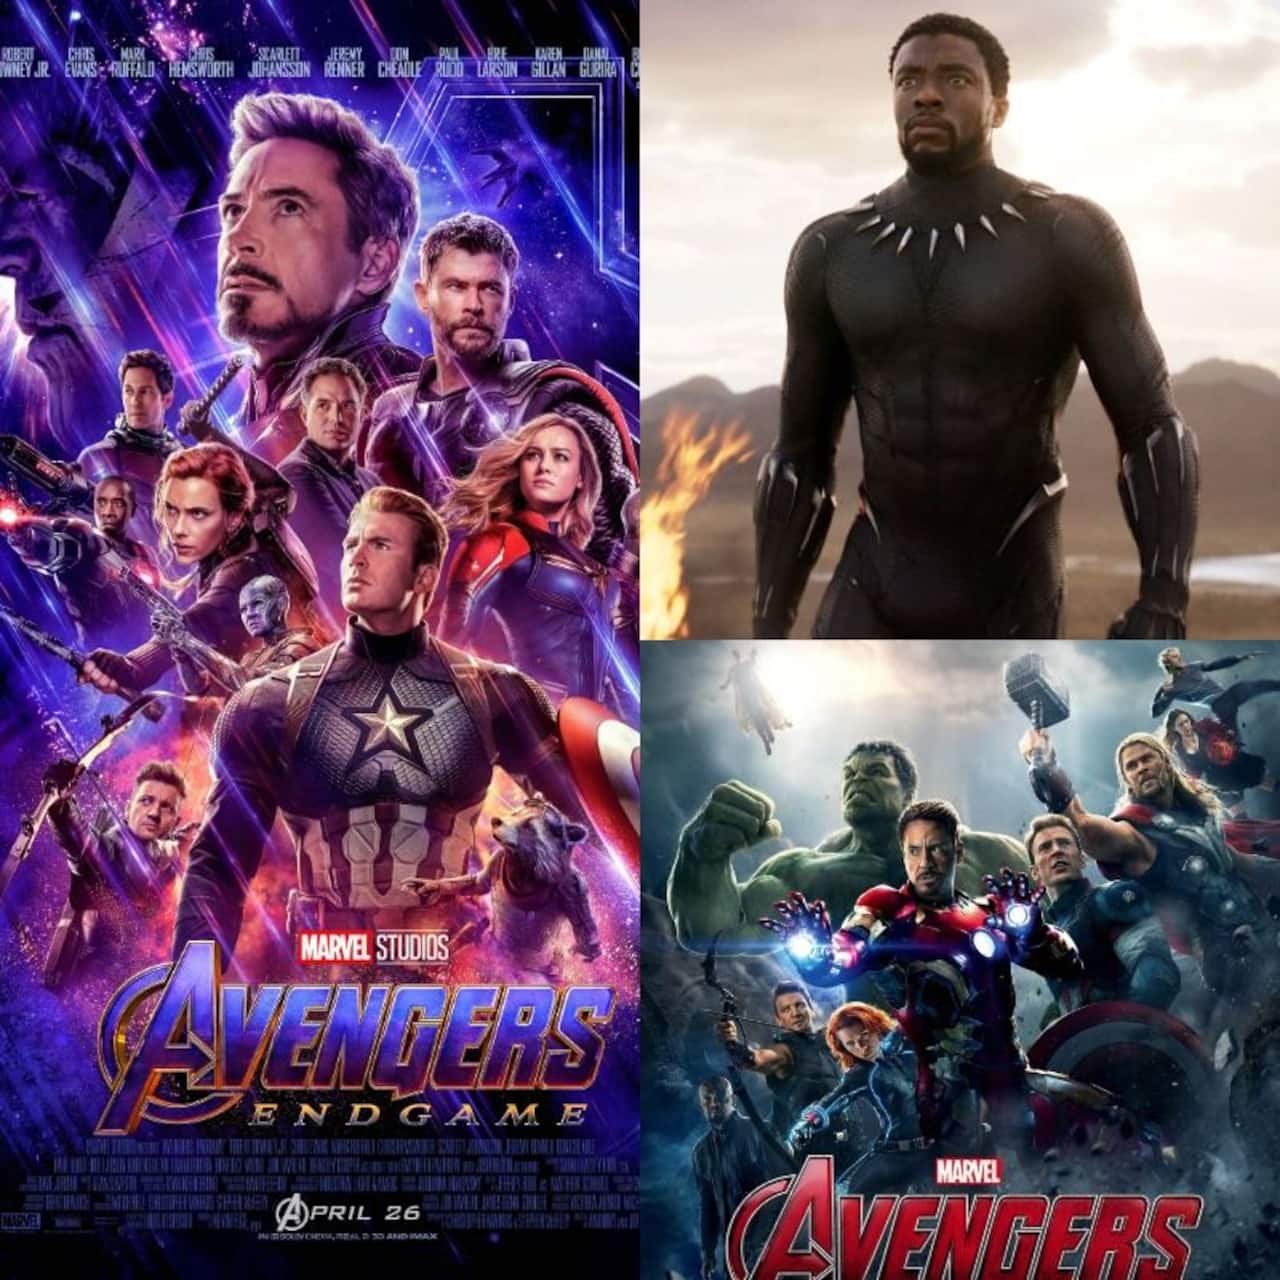 Avengers: Endgame CRUSHES Black Panther and Avengers: Age of Ultron to  become eighth-highest grosser at the worldwide box office - Bollywood News  & Gossip, Movie Reviews, Trailers & Videos at 